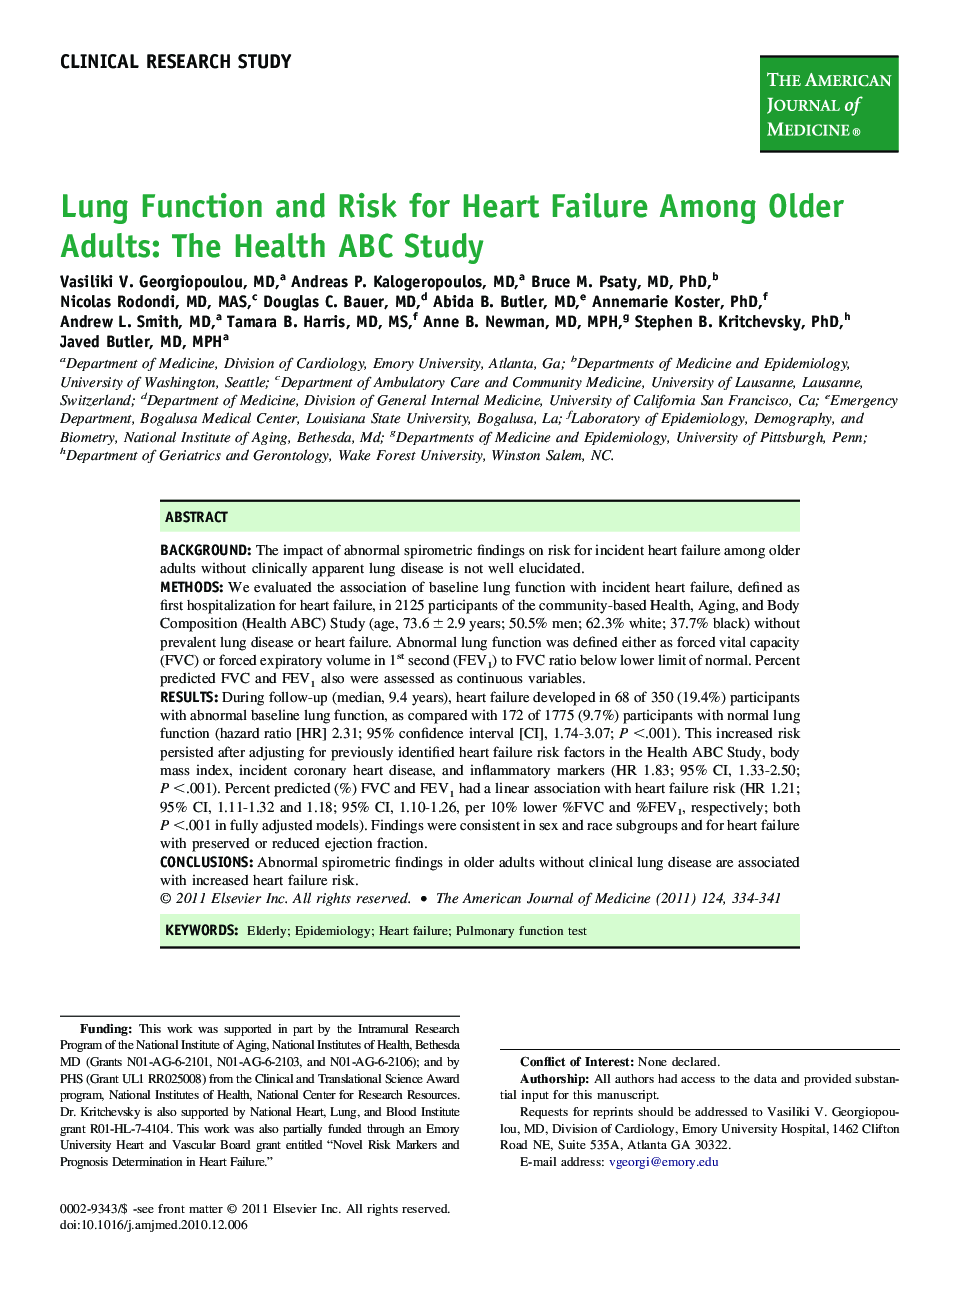 Lung Function and Risk for Heart Failure Among Older Adults: The Health ABC Study 